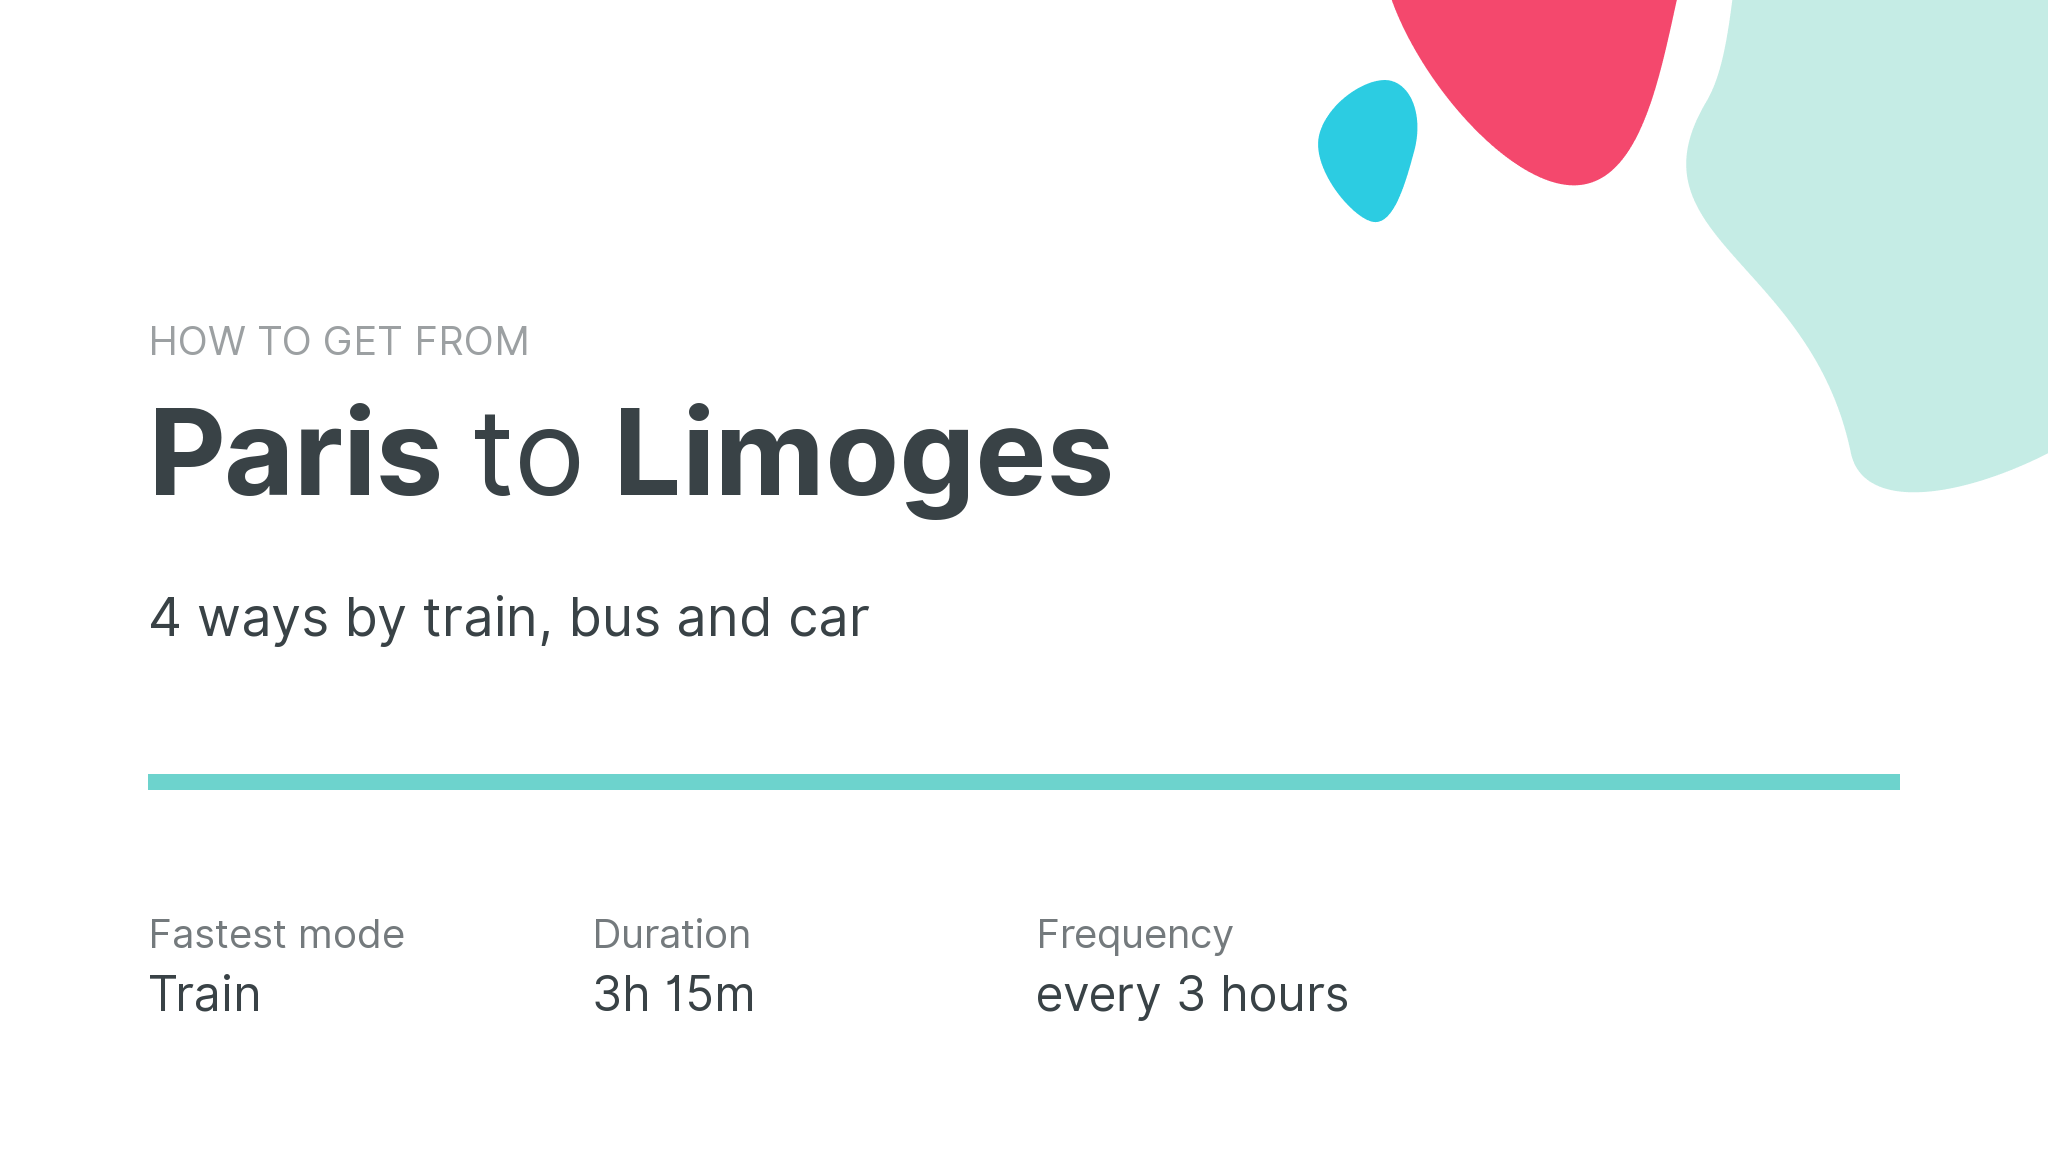 How do I get from Paris to Limoges